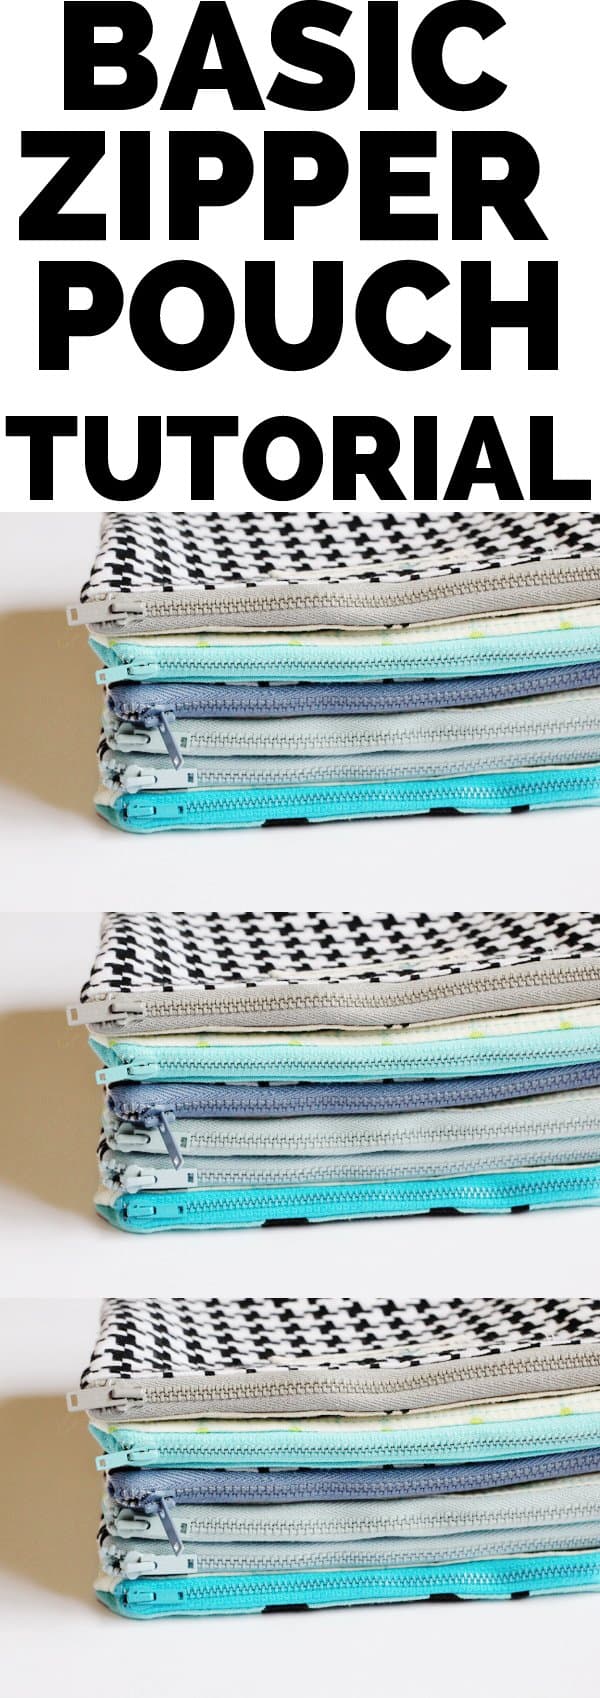 The Basic Zipper Pouch Tutorial | diy zipper pouch | sewing tutorials | sewing tips and tricks | how to make a zipper pouch | diy sewing | diy zipper pouch | easy sewing projects || See Kate Sew #zipperpouch #sewingtutorial #sewingtips 